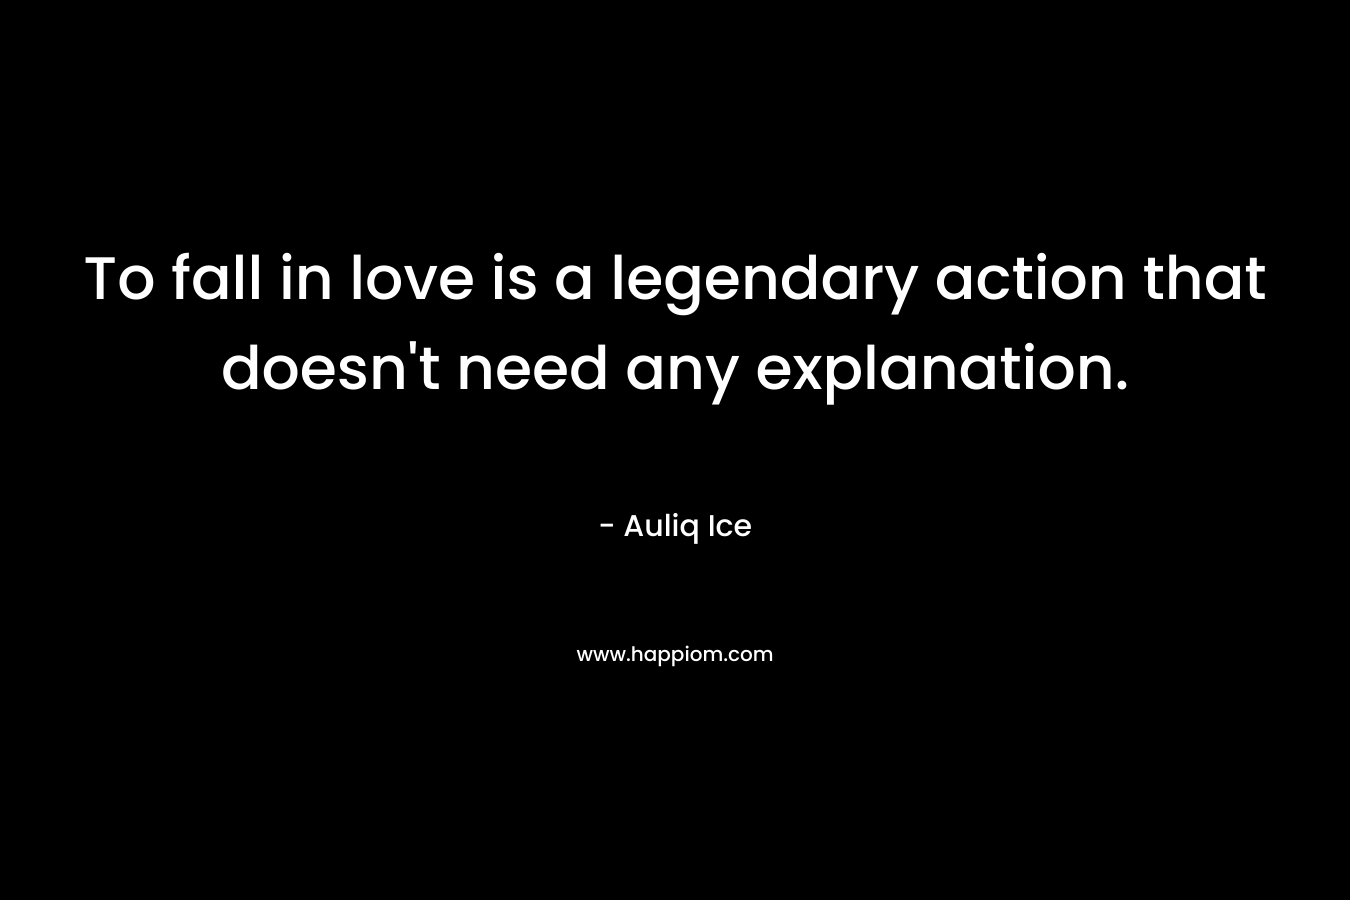 To fall in love is a legendary action that doesn’t need any explanation. – Auliq Ice